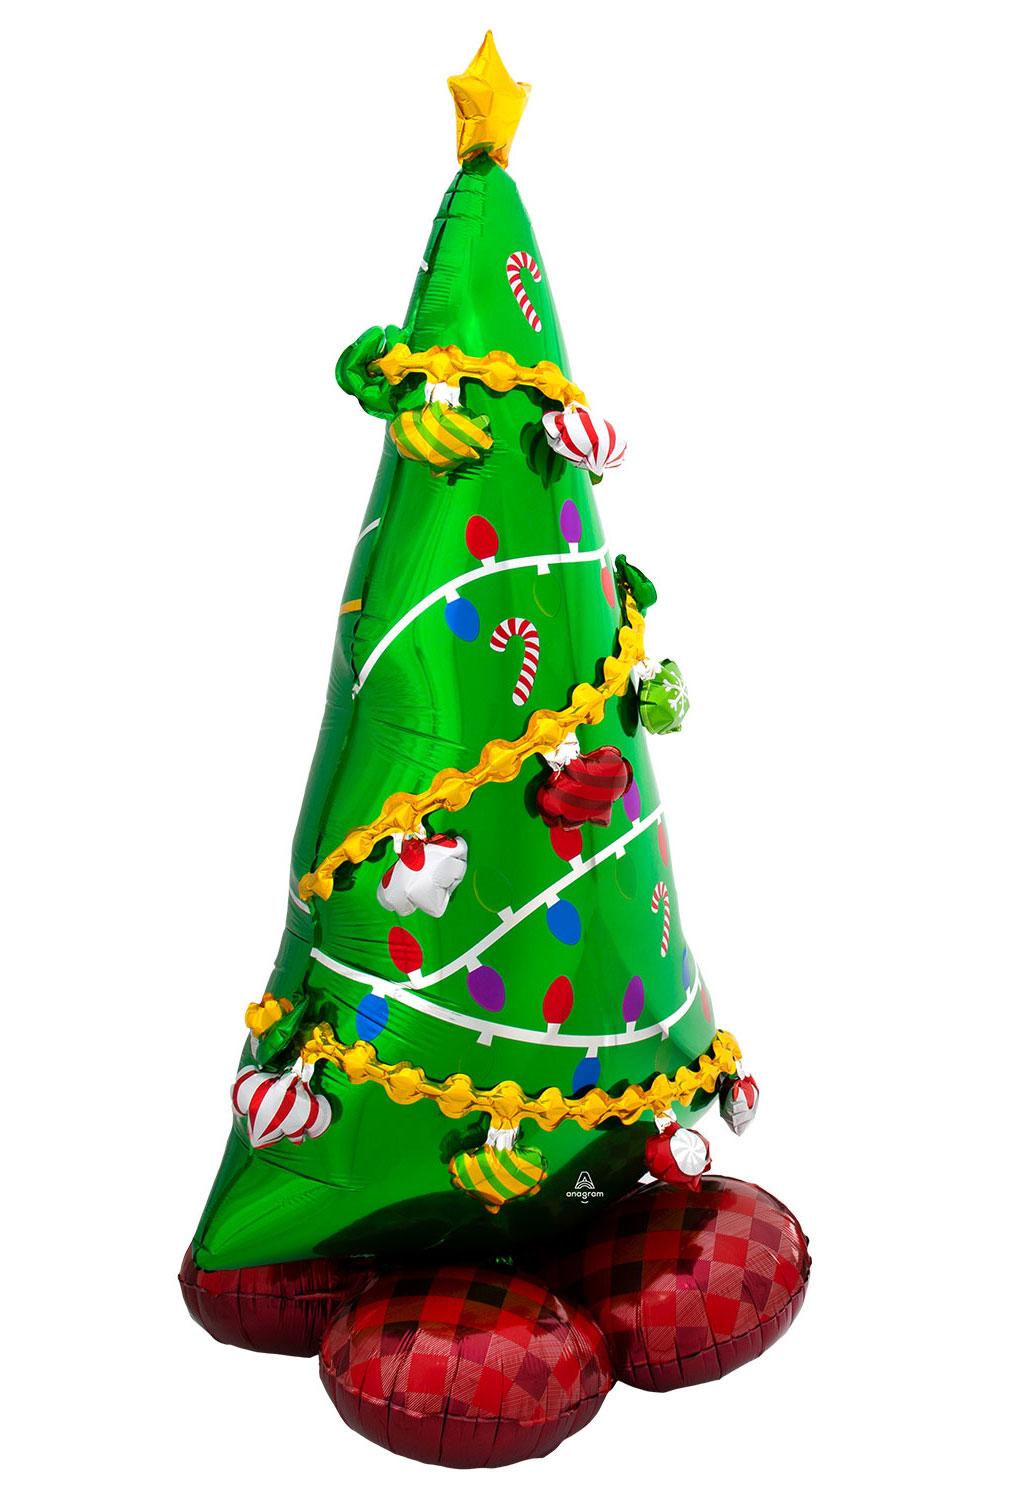 59" tall AirLoonz Christmas Tree Air-Fill Character Balloon by Amscan 8311711 available here at Karnival Costumes online party shop